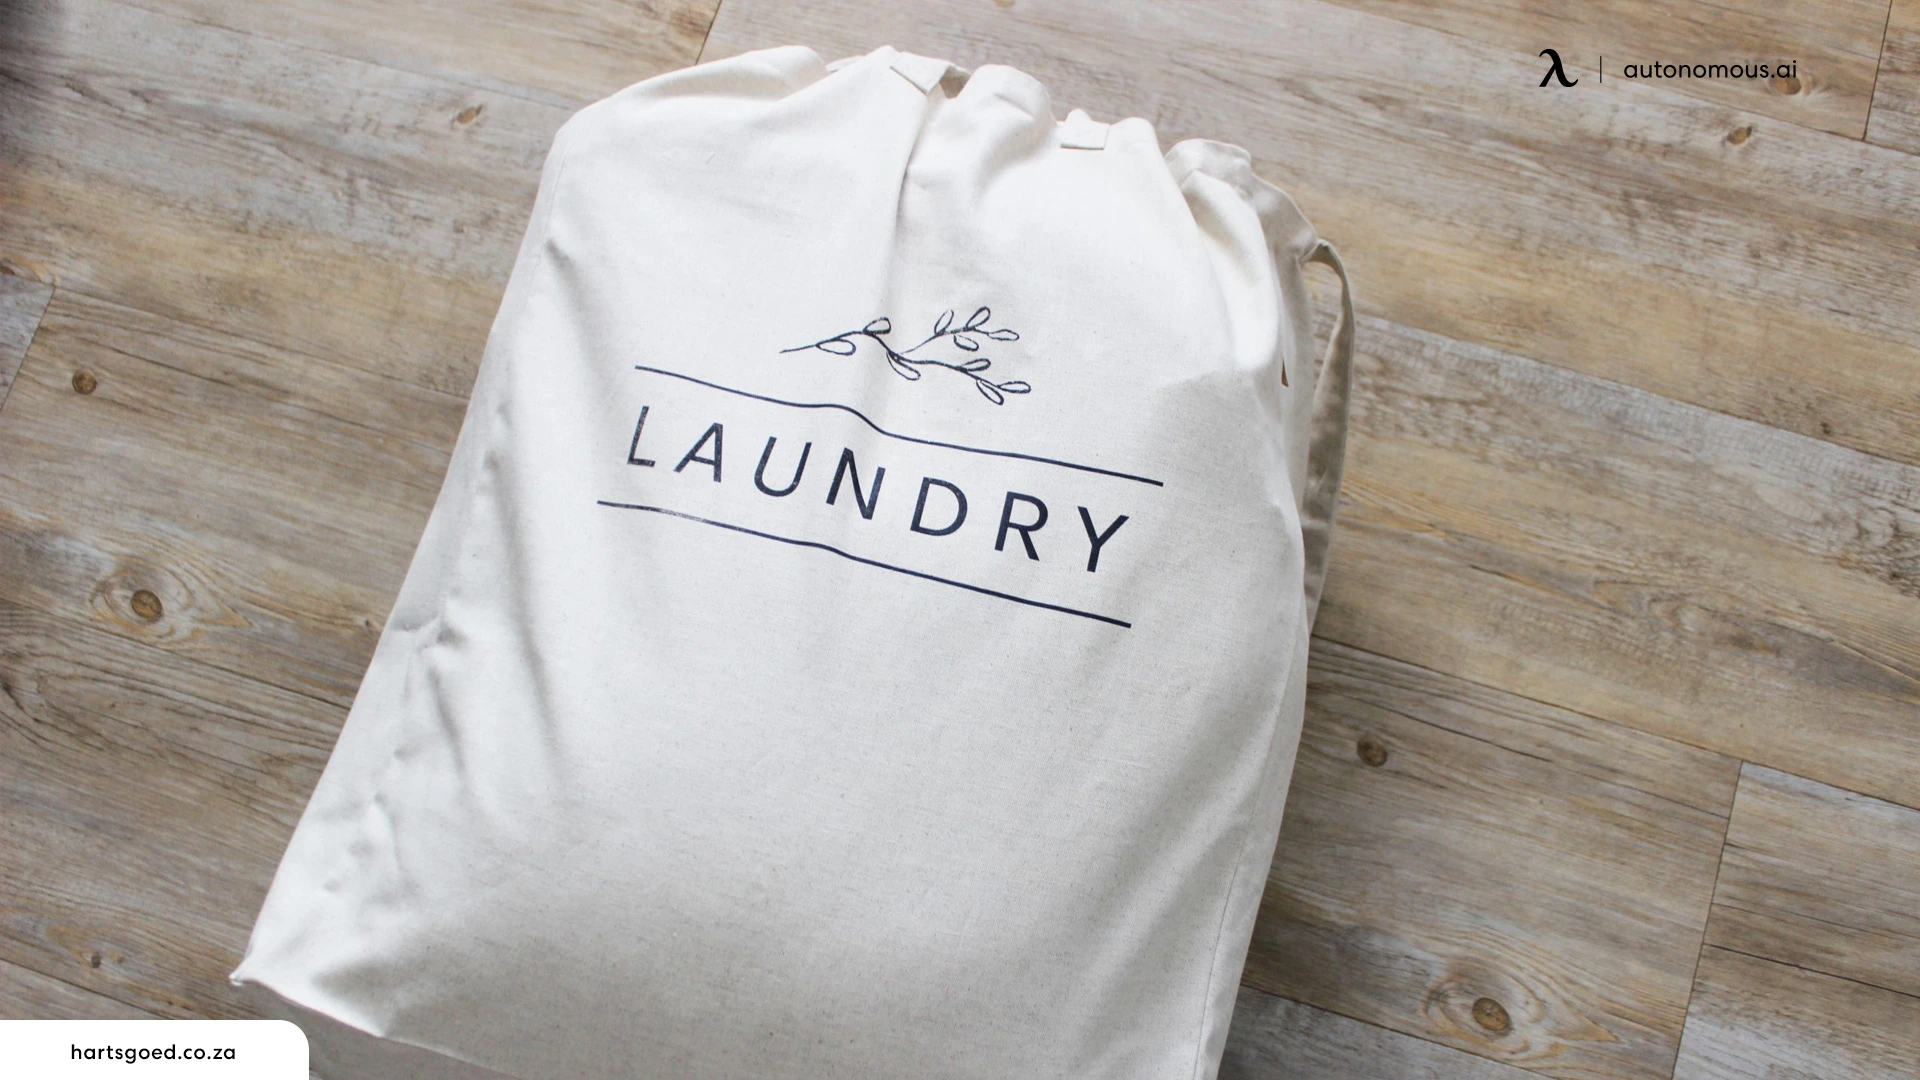 Linen and Laundry Items